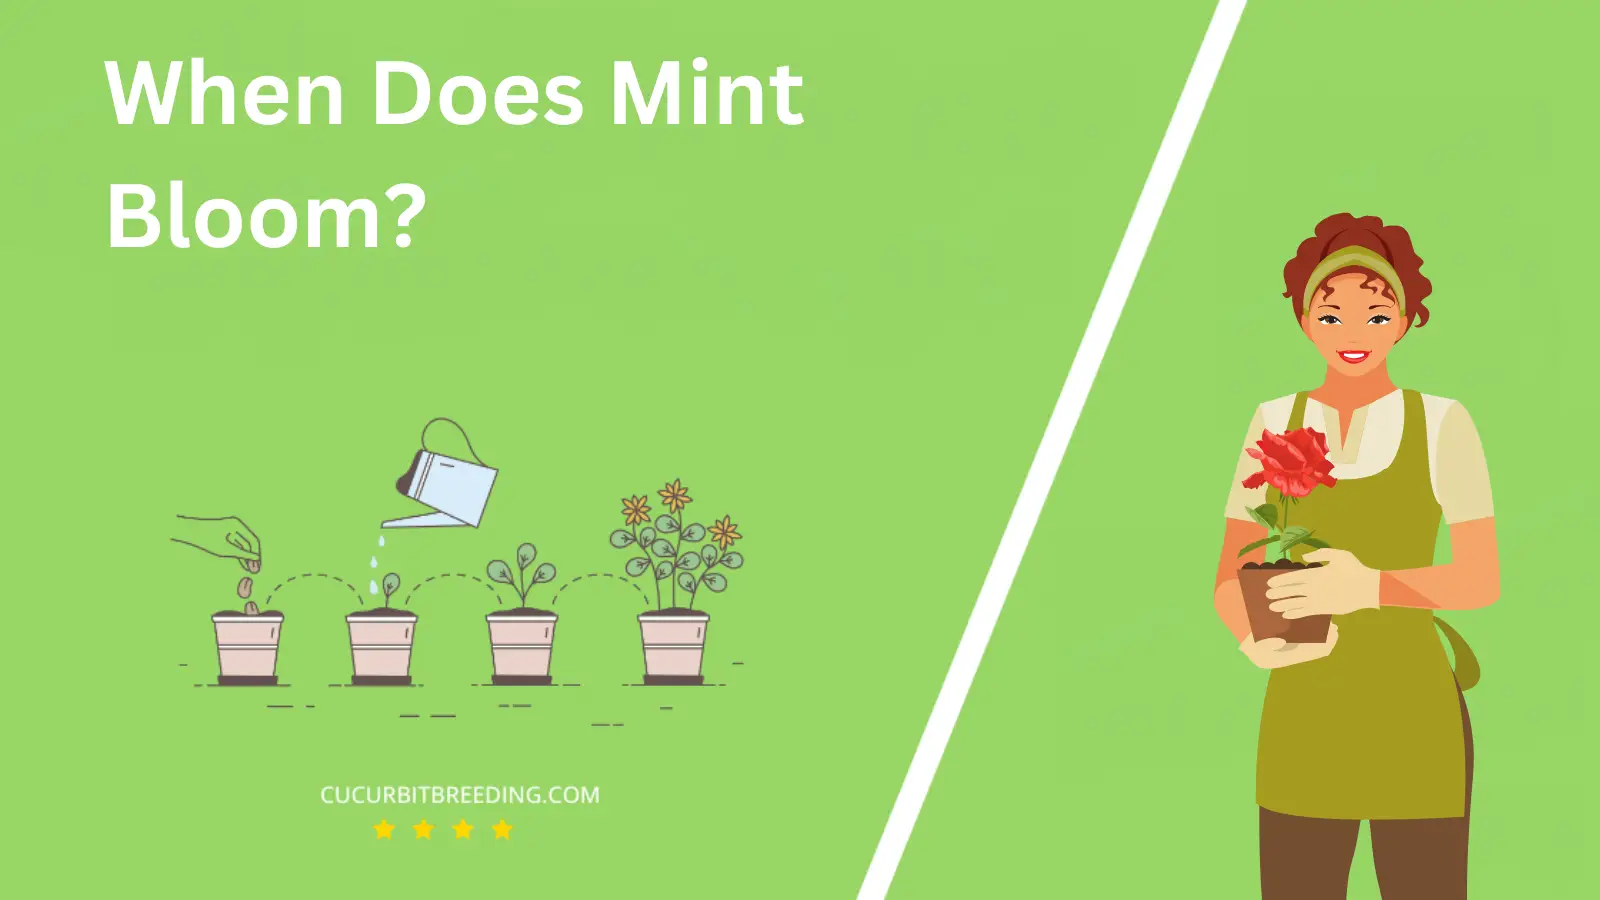 When Does Mint Bloom?